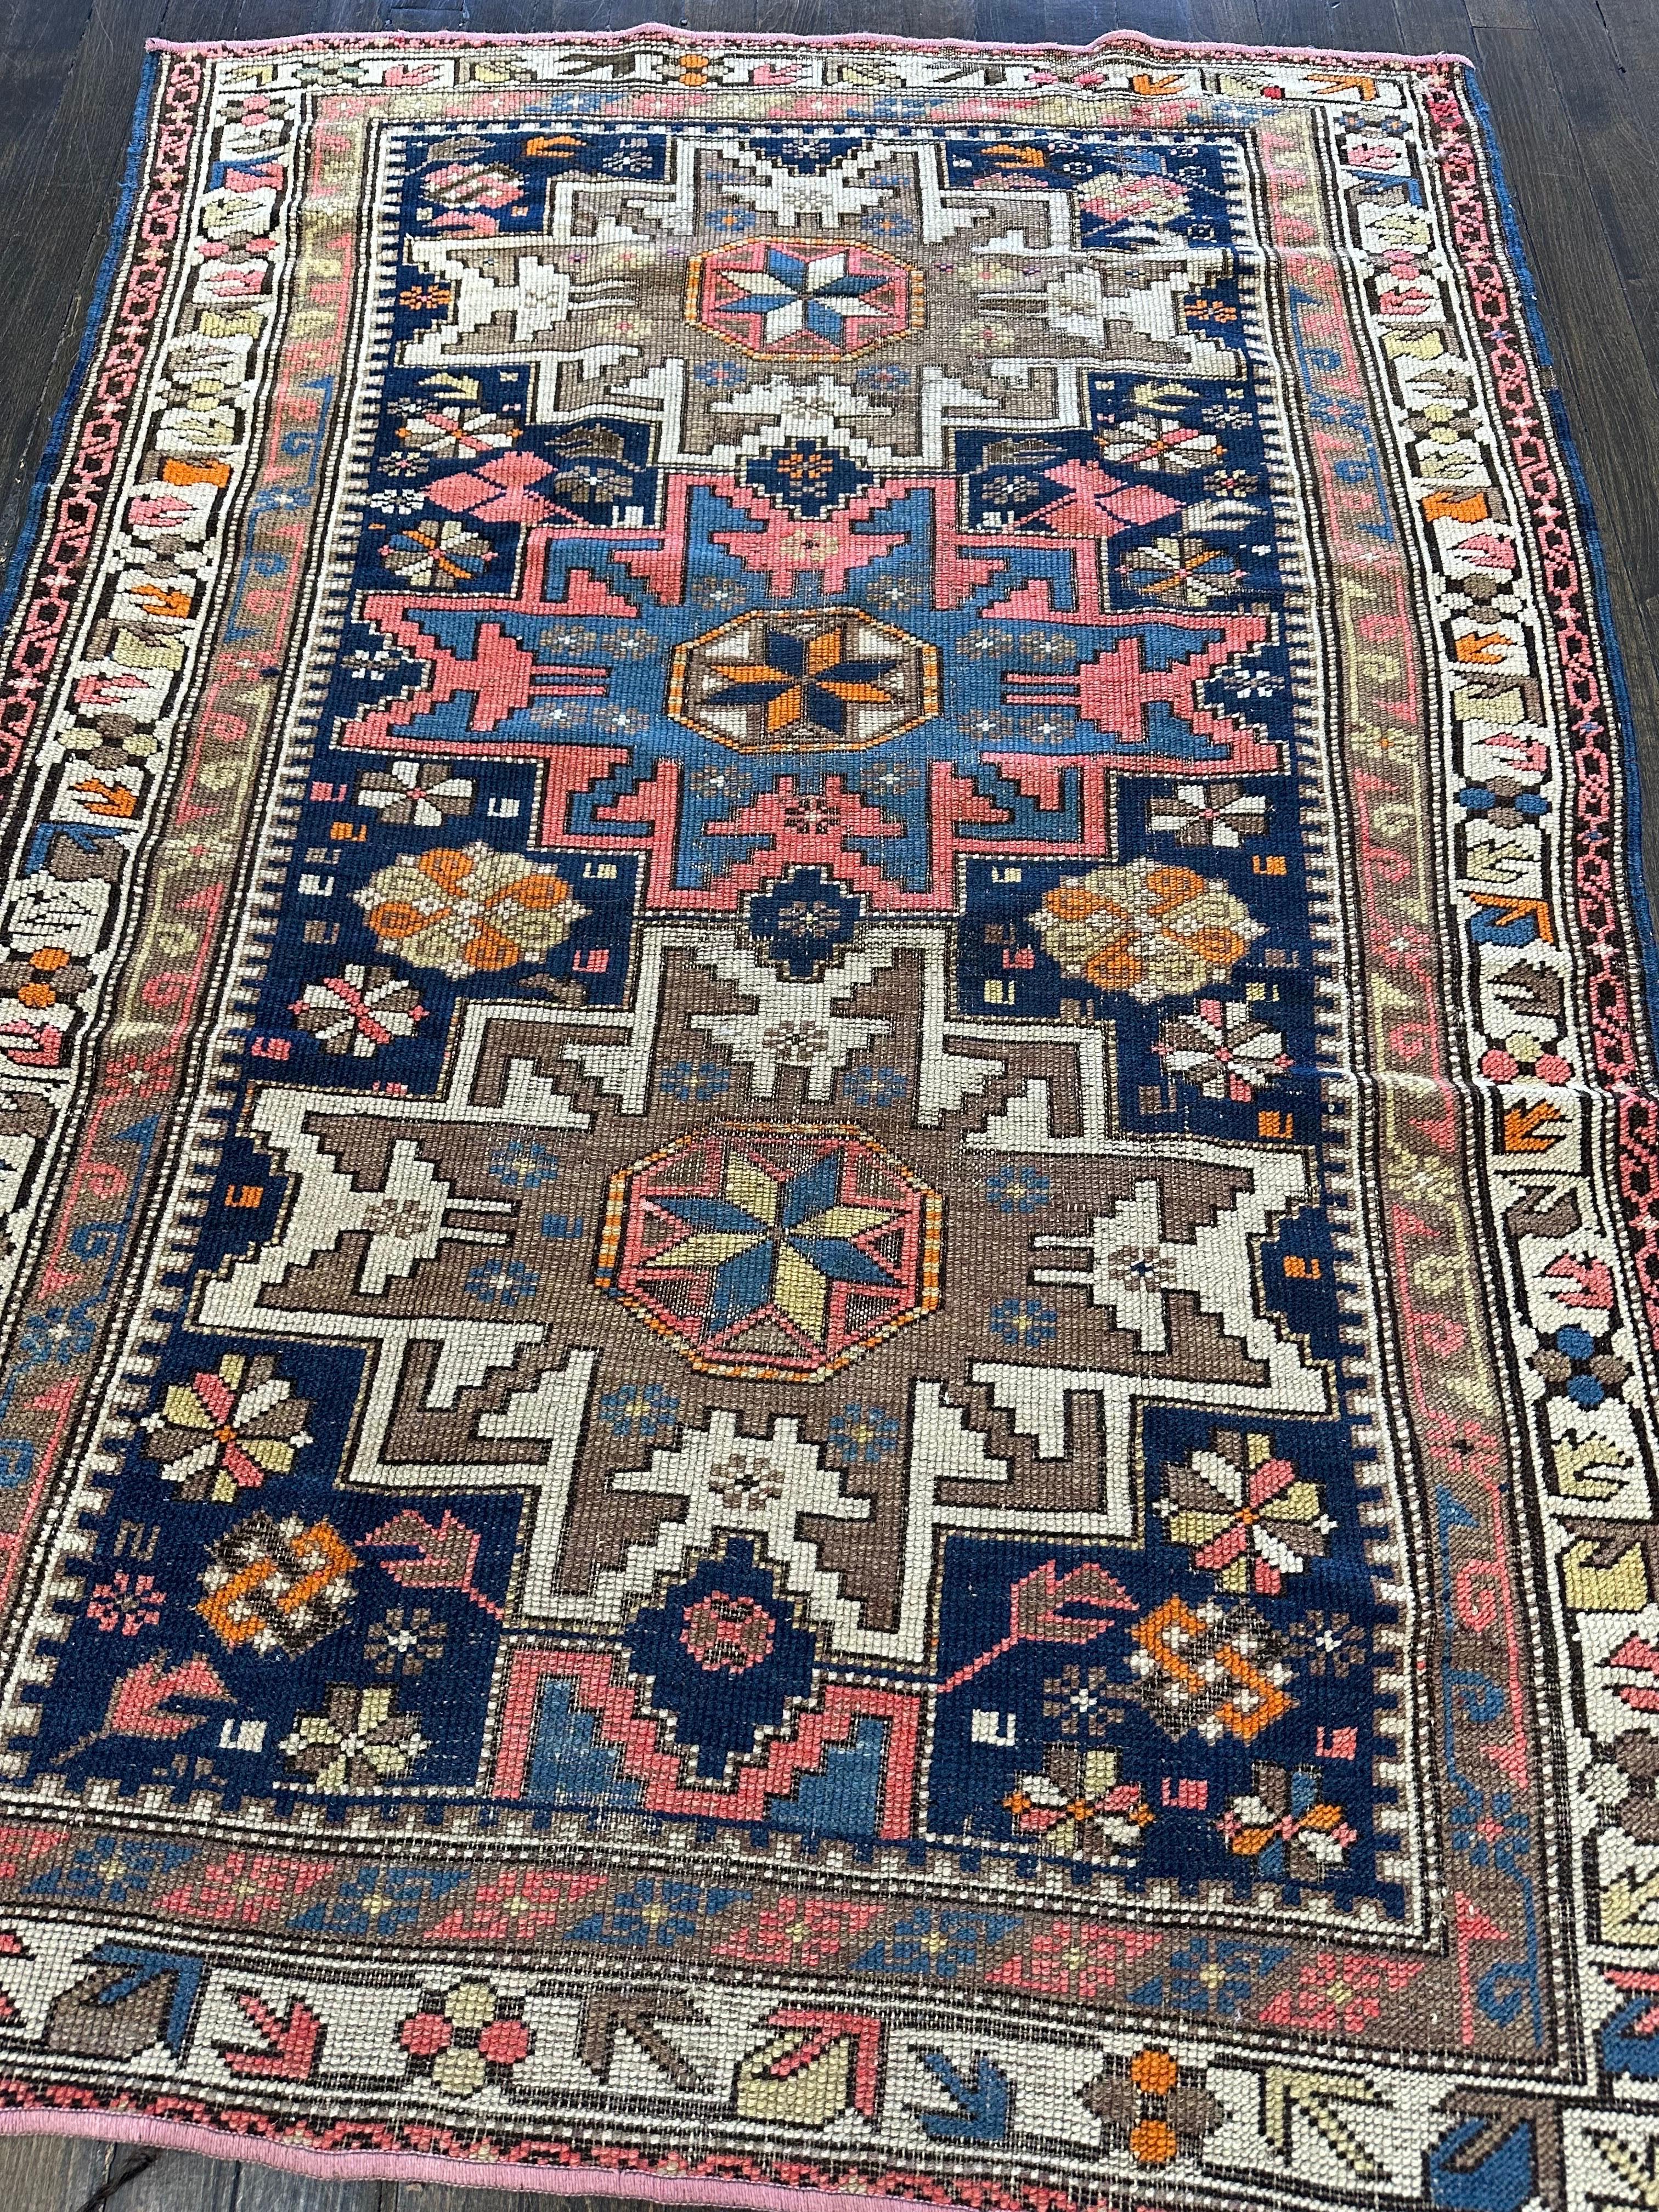 Great looking antique Caucasian Shirvan featuring an indigo blue field decorated with three star medallions, two in ivory and tan and the middle one with sky blue and pale orange colors. These twelve pointed stars with stepped outlines known as